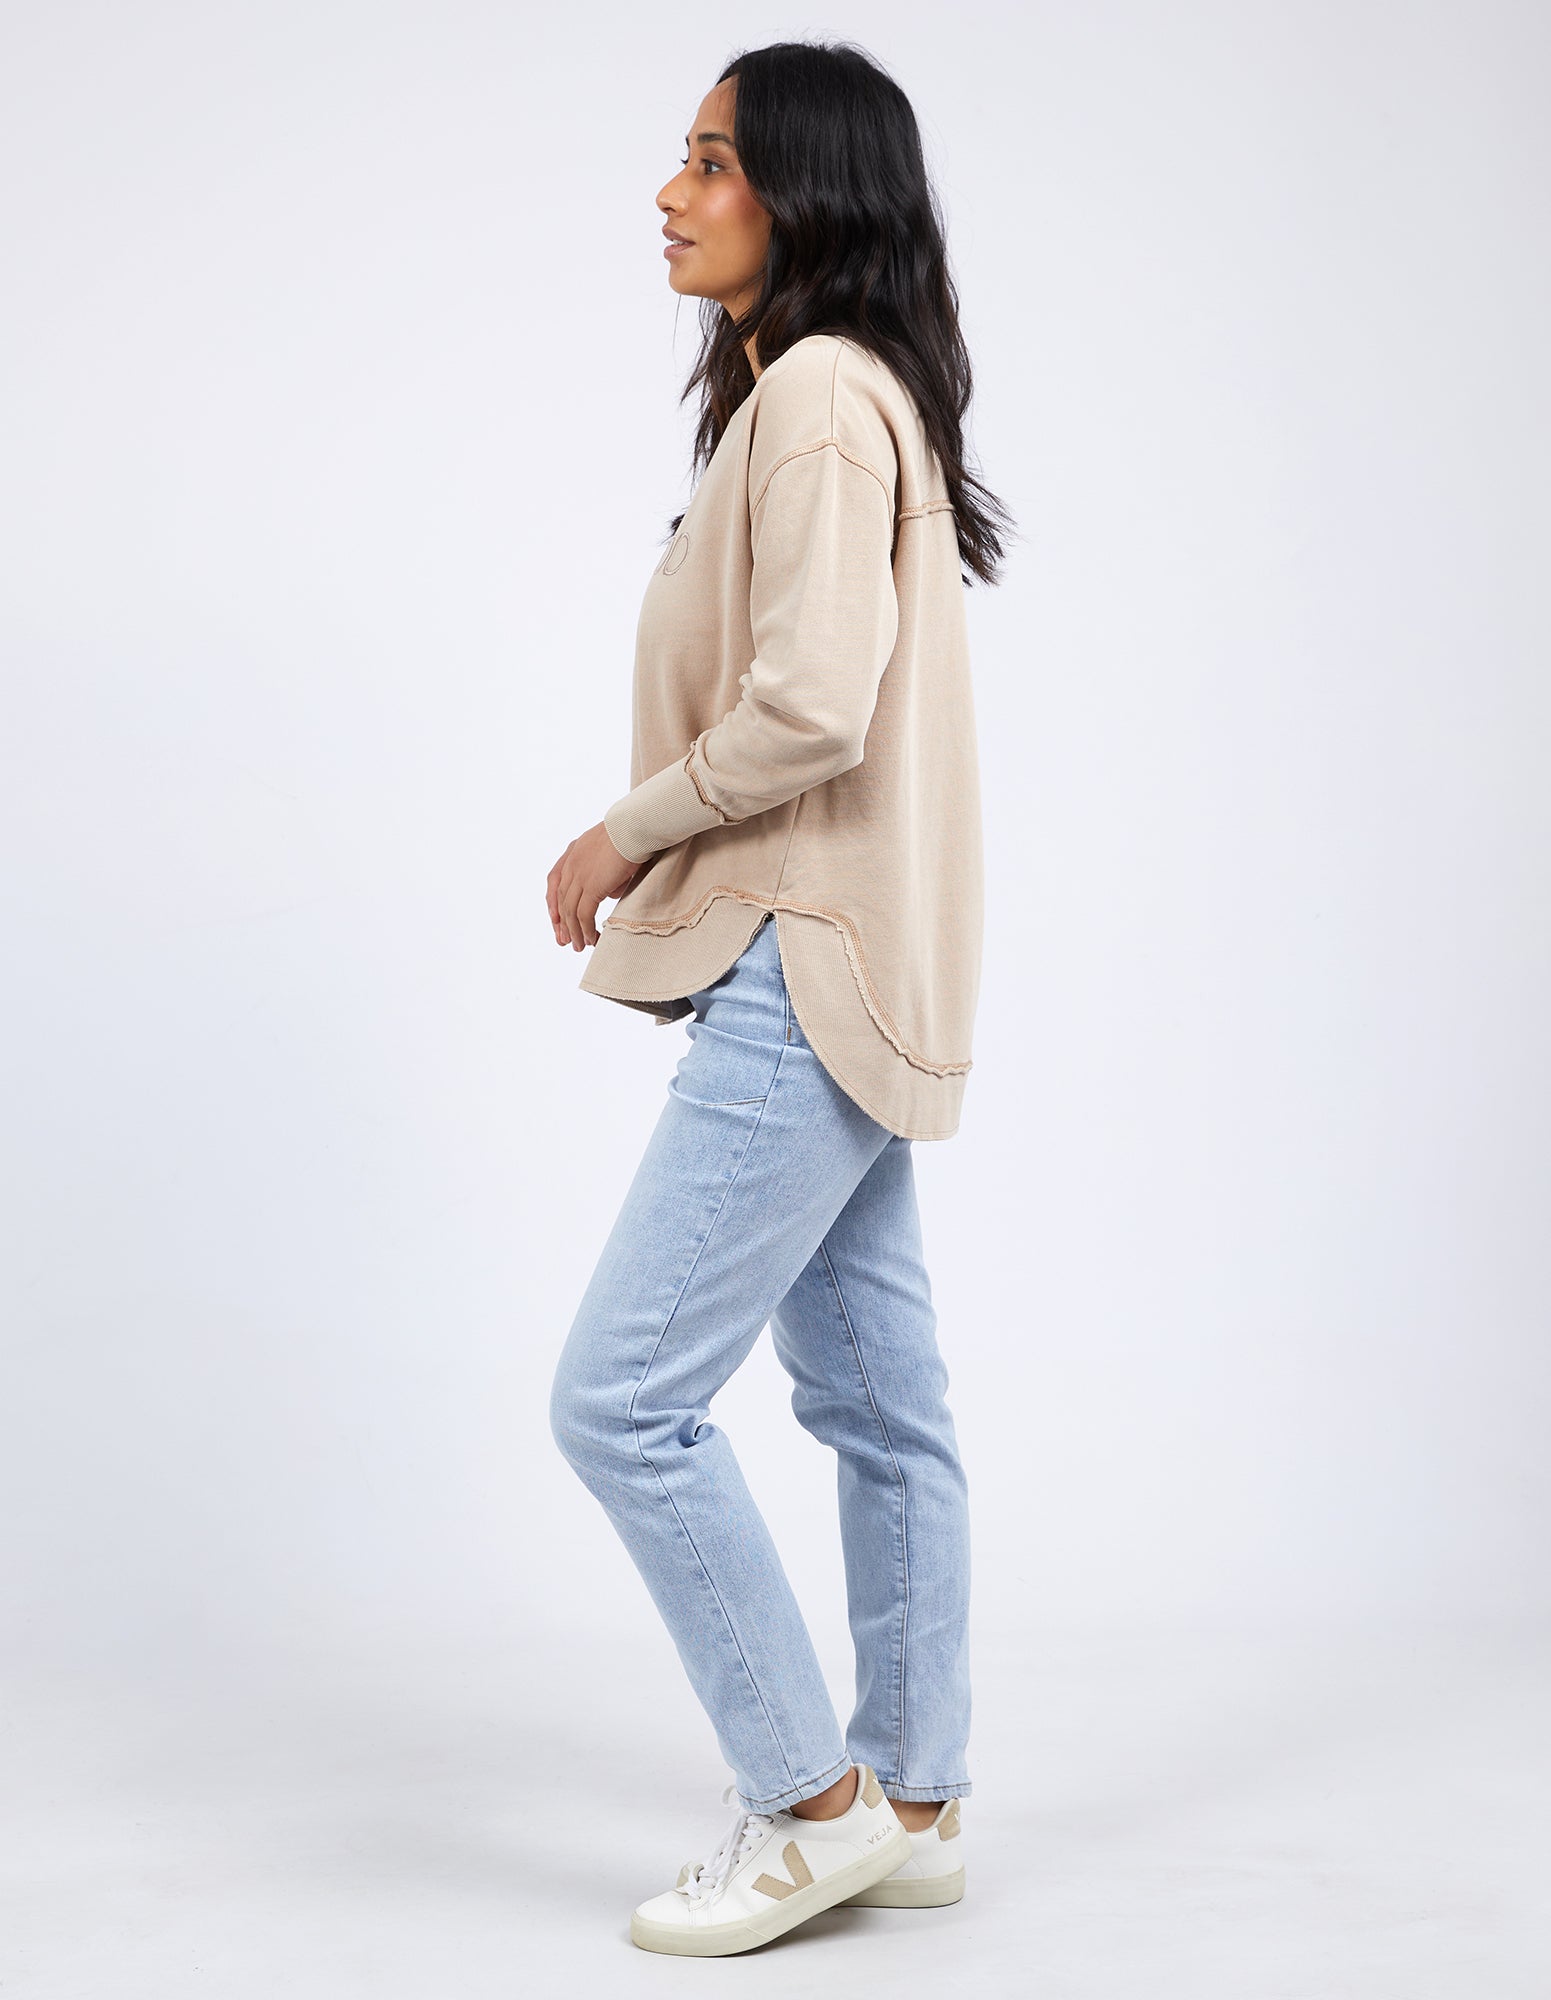 FOXWOOD SIMPLIFIED CREW - OATMEAL - THE VOGUE STORE